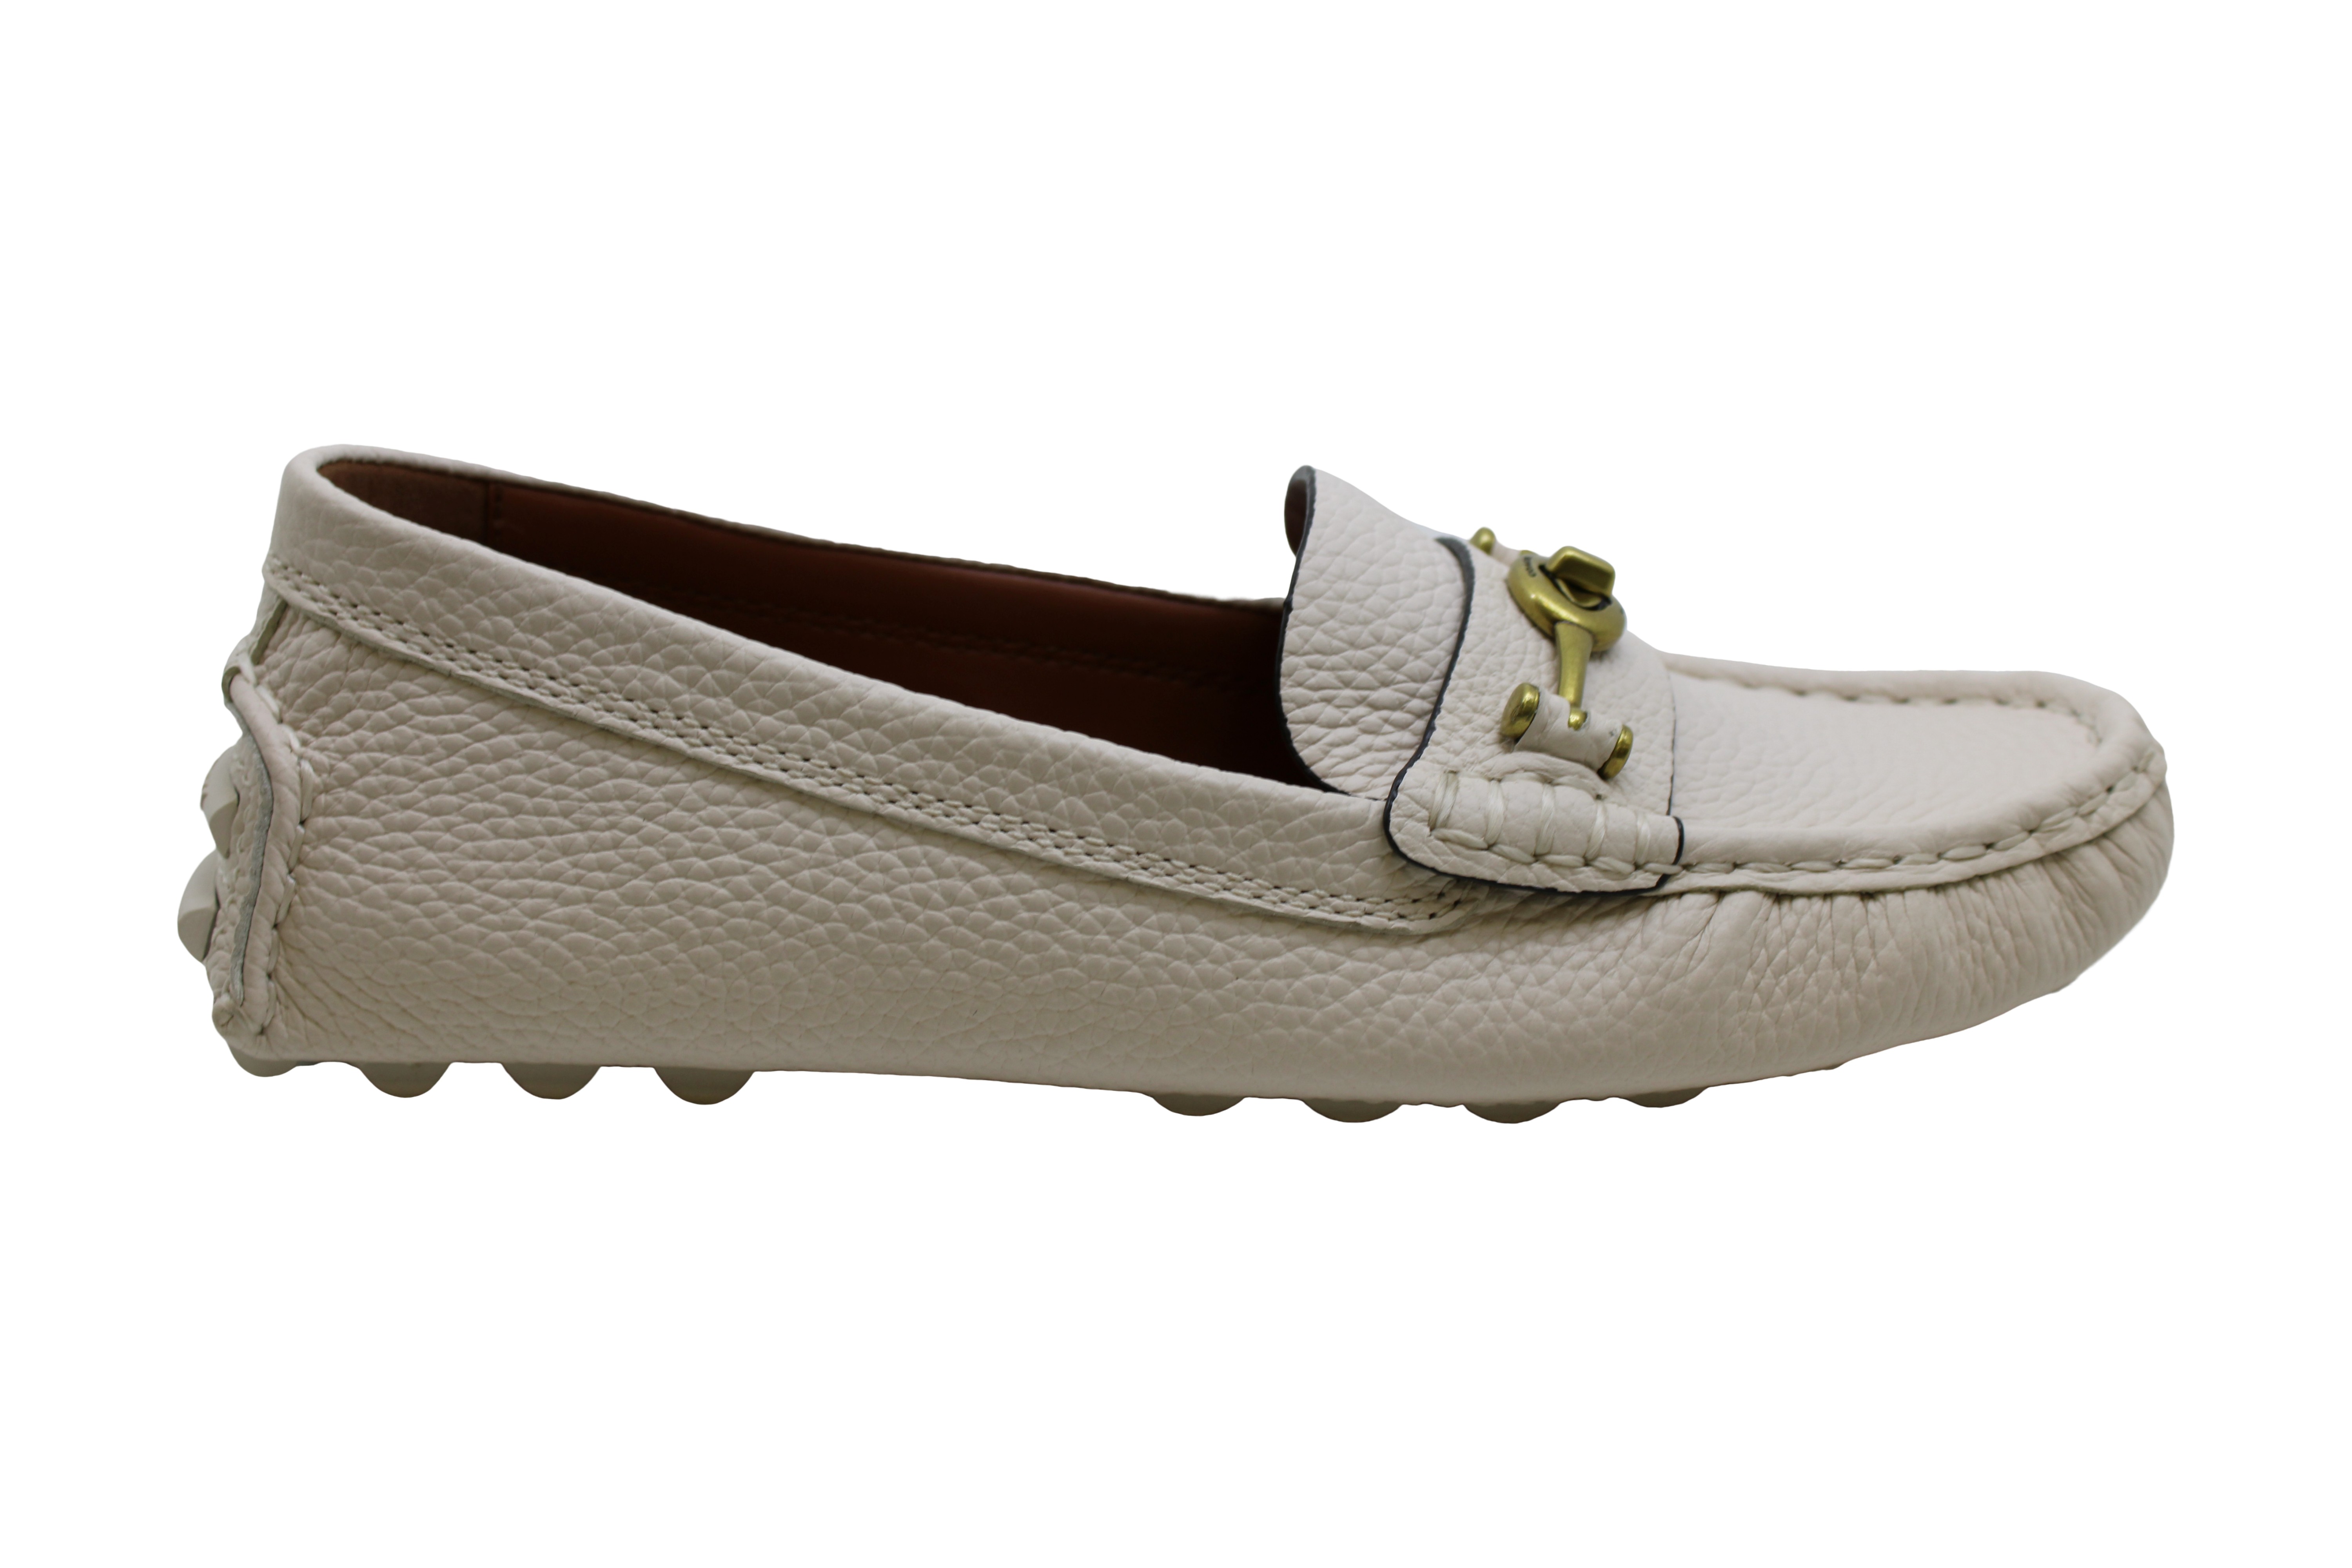 Coach Womens Crosby Closed Toe Loafers, White, Size 9.0 CXkW | eBay